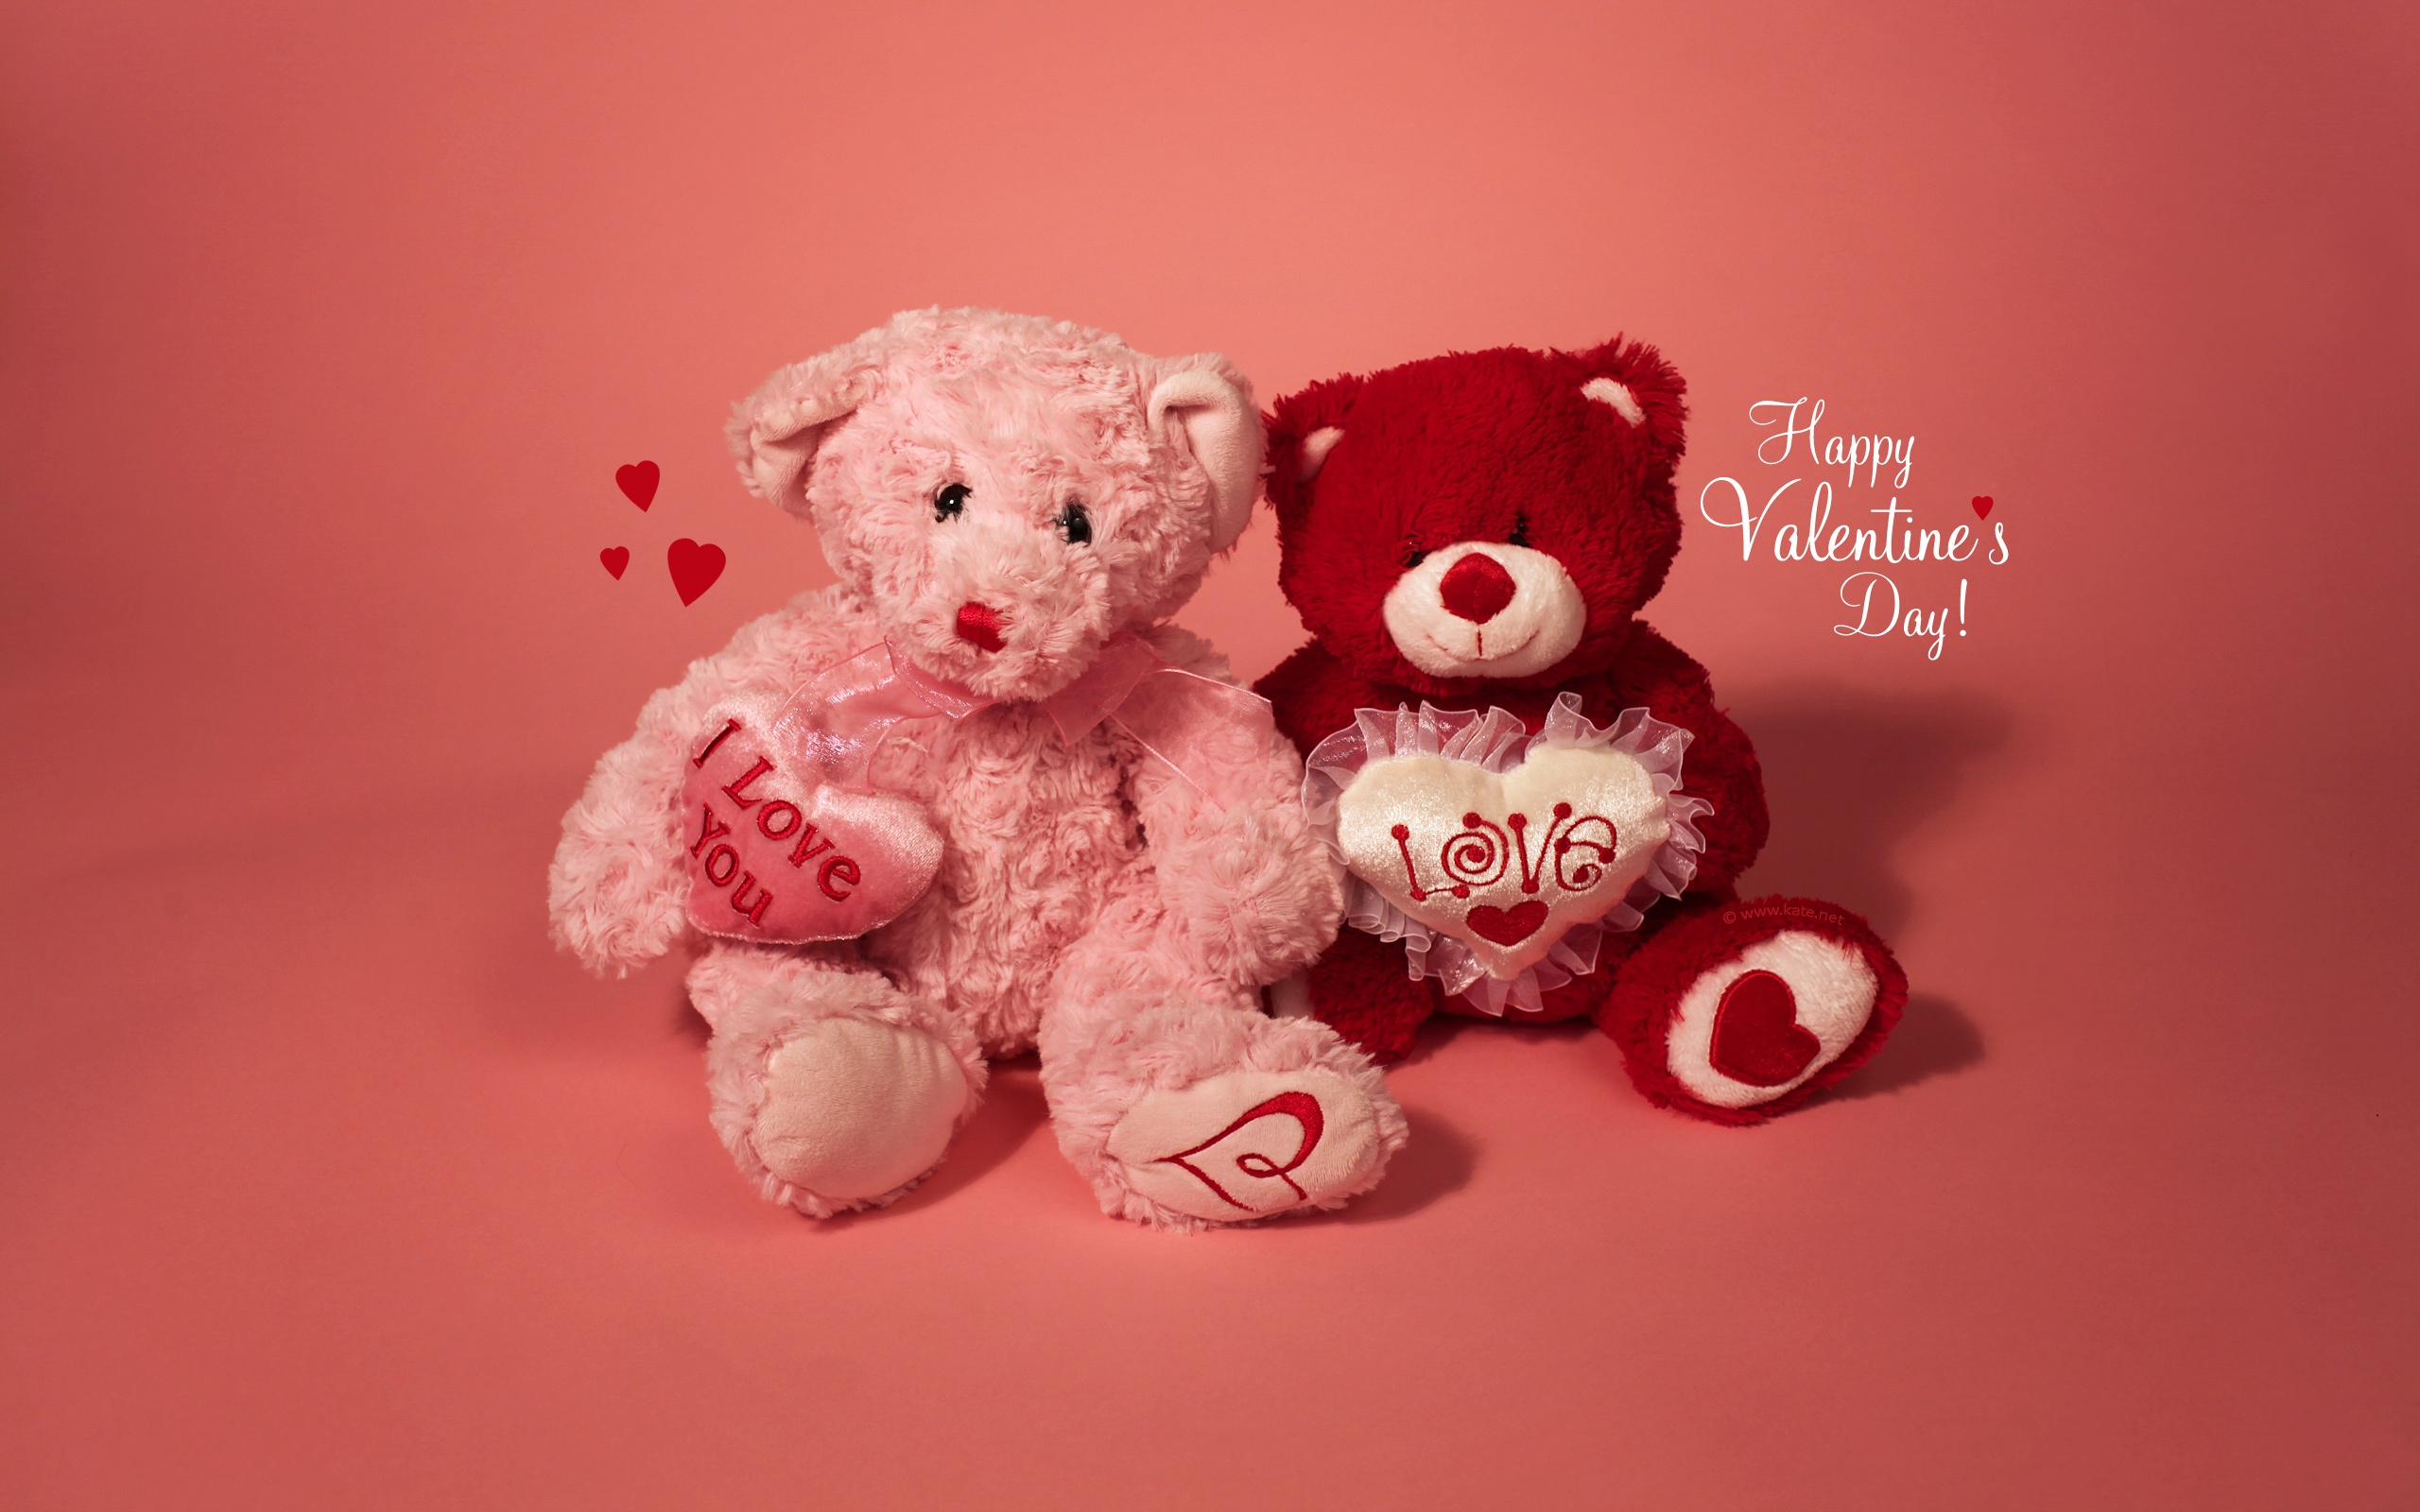 Happy Valentines Day HD Wallpaper In Jpg Format For